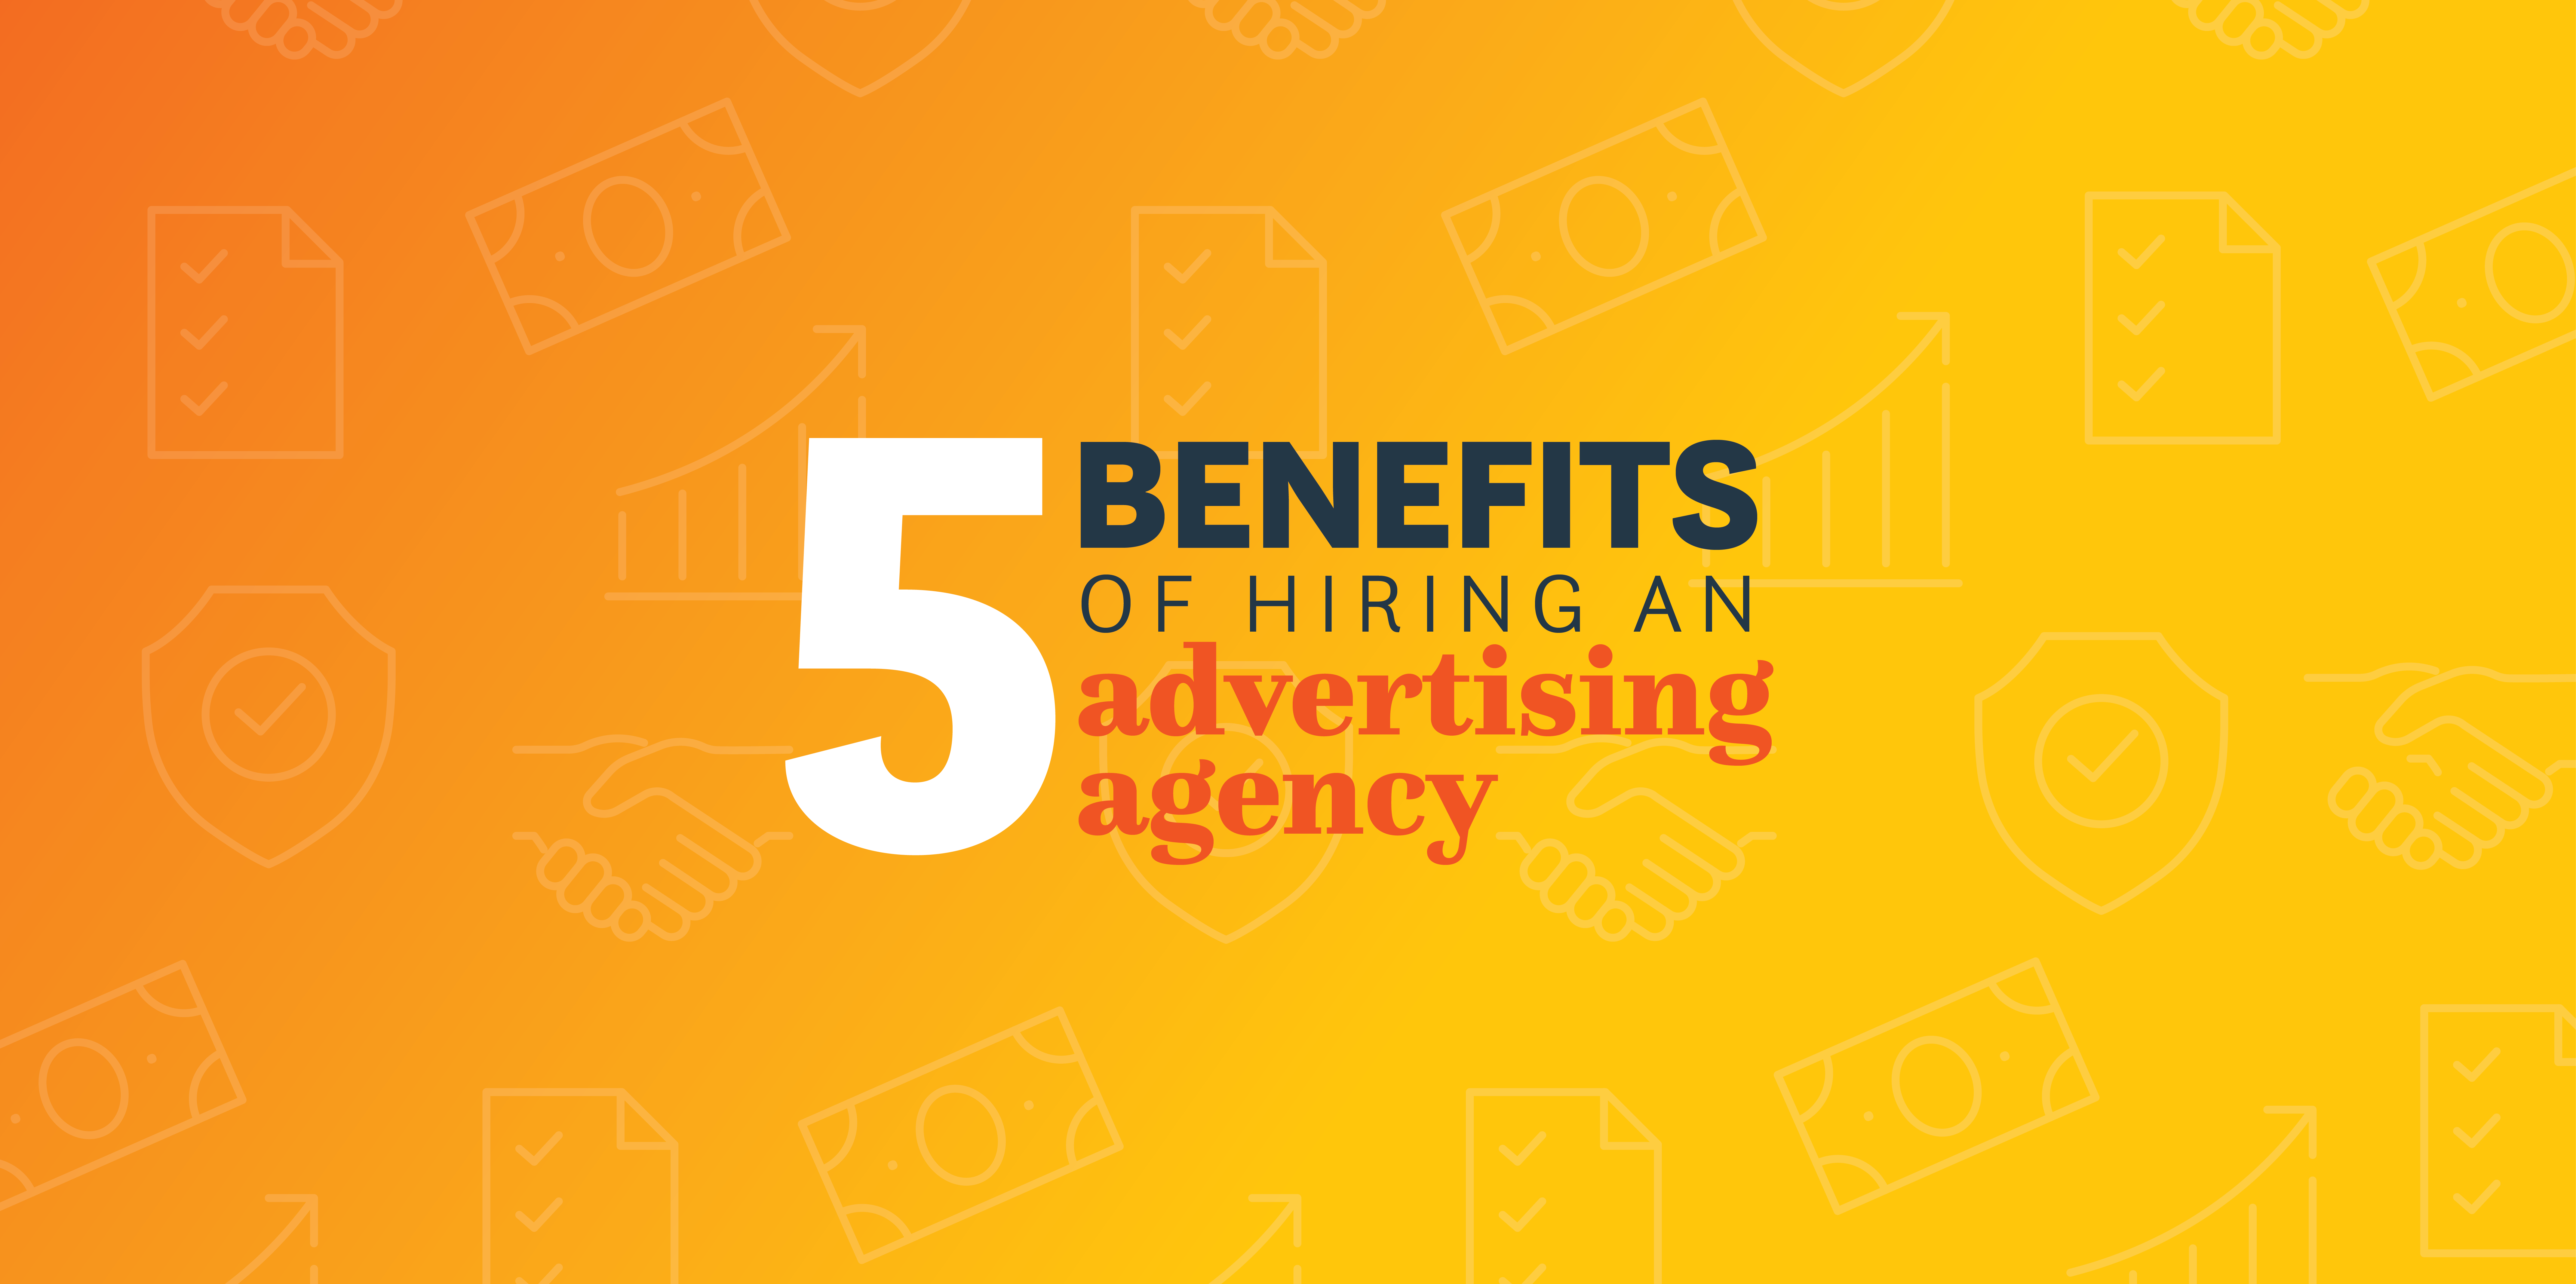 5 Benefits of Hiring an Advertising Agency